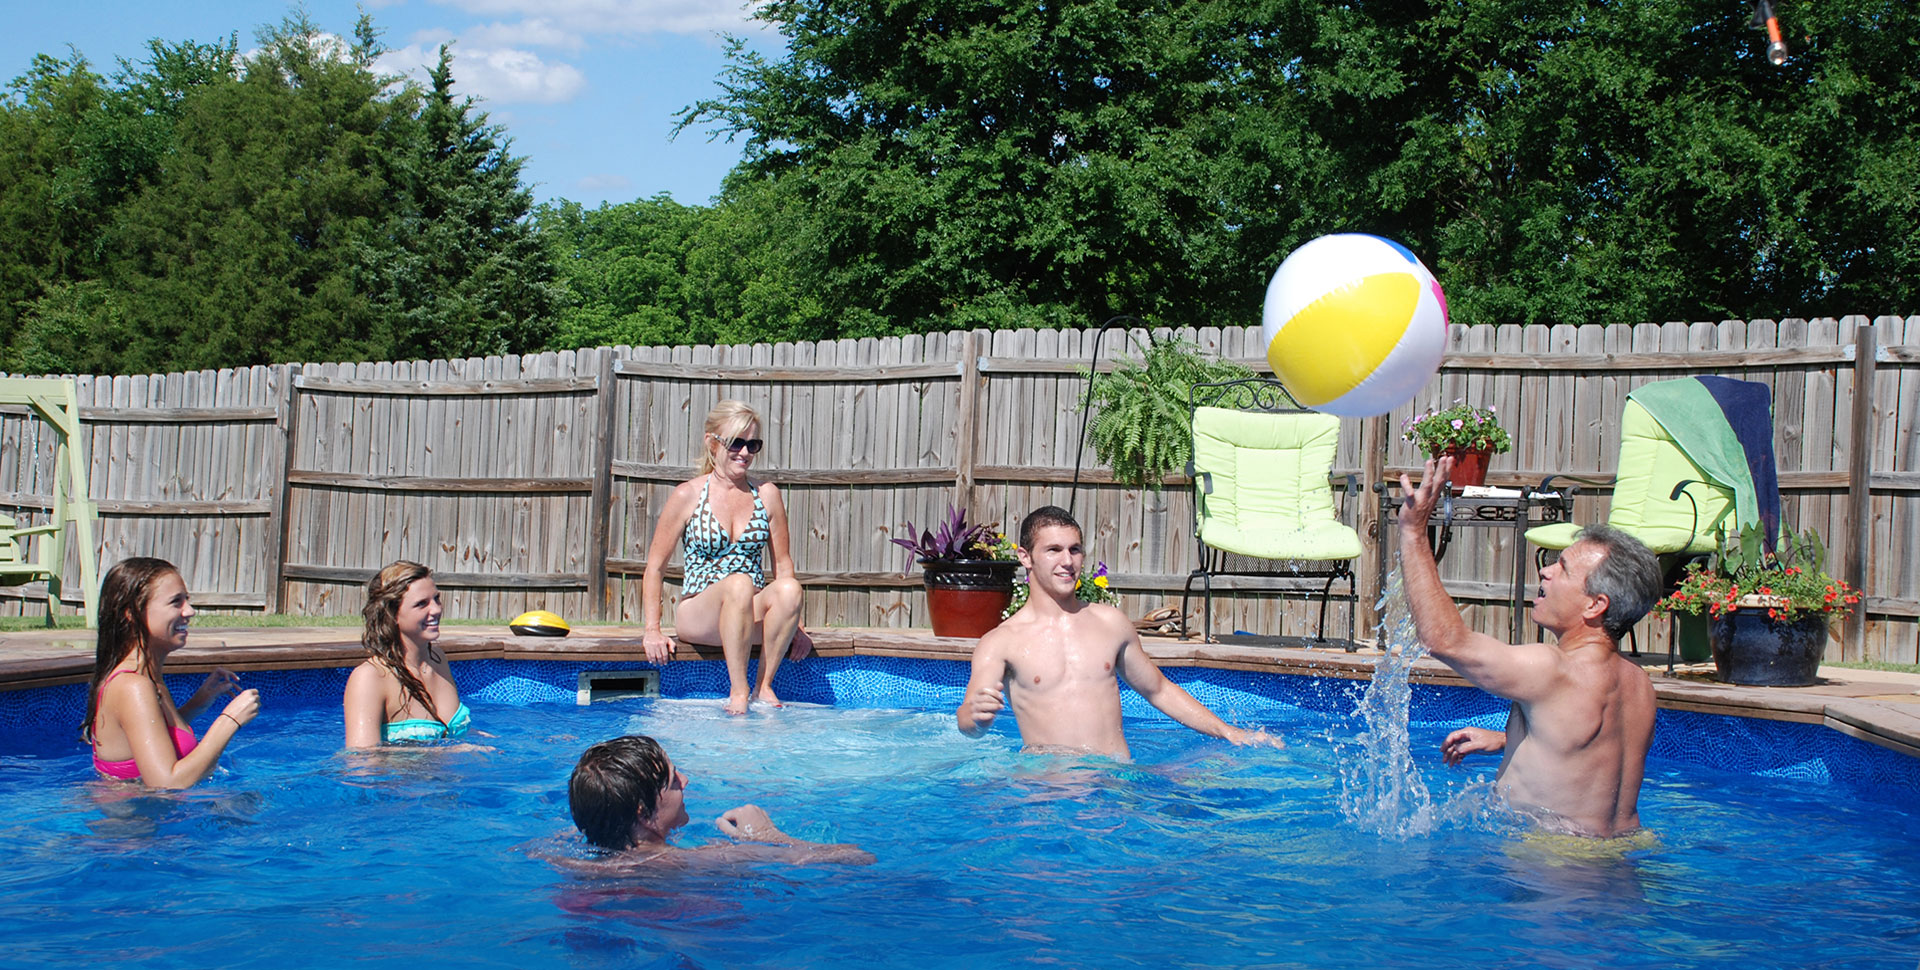 10+Mini Pool Ideas That Will Make Your Backyard the Hottest Spot.